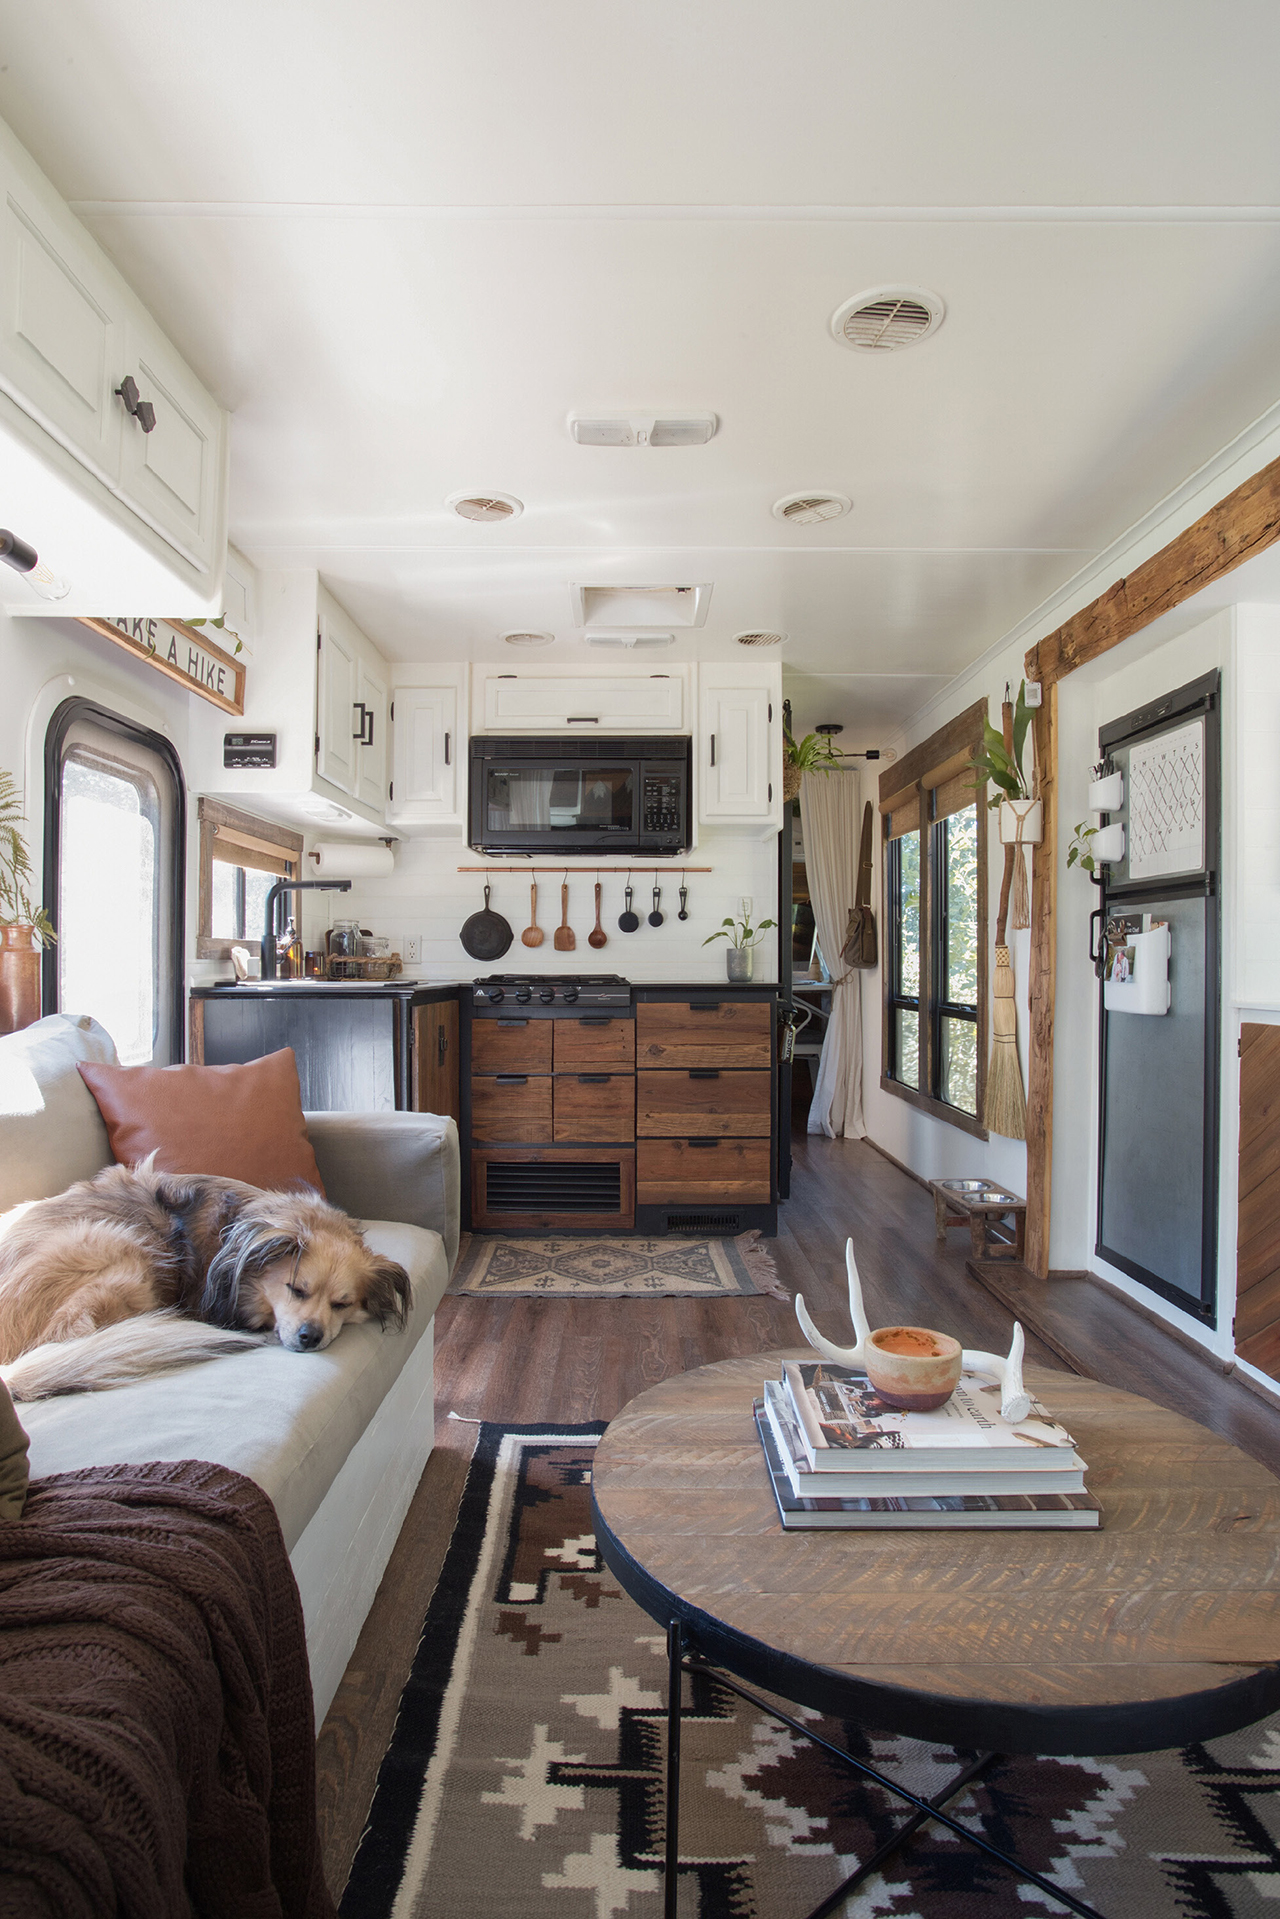 How to Paint the Walls of Your RV